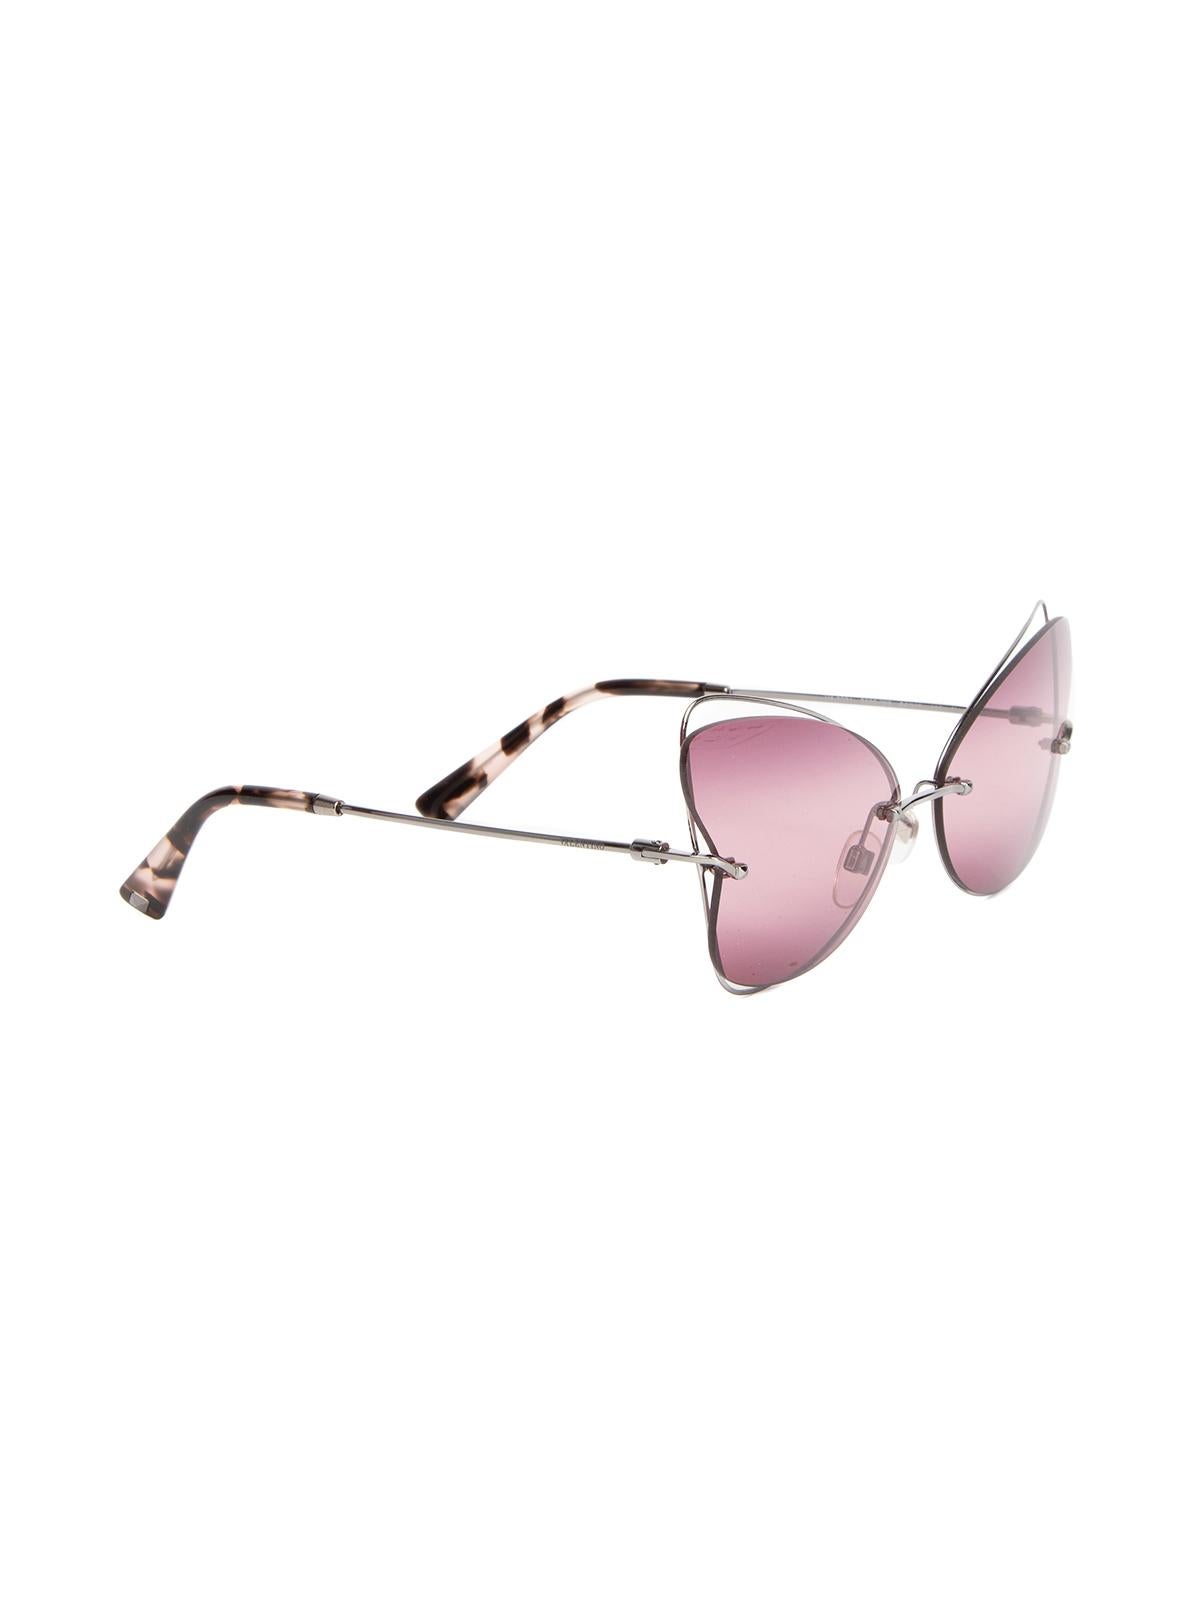 CONDITION is Never worn, with tags. No visible wear to sunglasses is evident on this new Valentino designer resale item. Details Cat eye Pink tint lens Tortoiseshell arms Comes with case Composition Acetate, polyamide Size & Fit Arms - 14. 5cm/6in